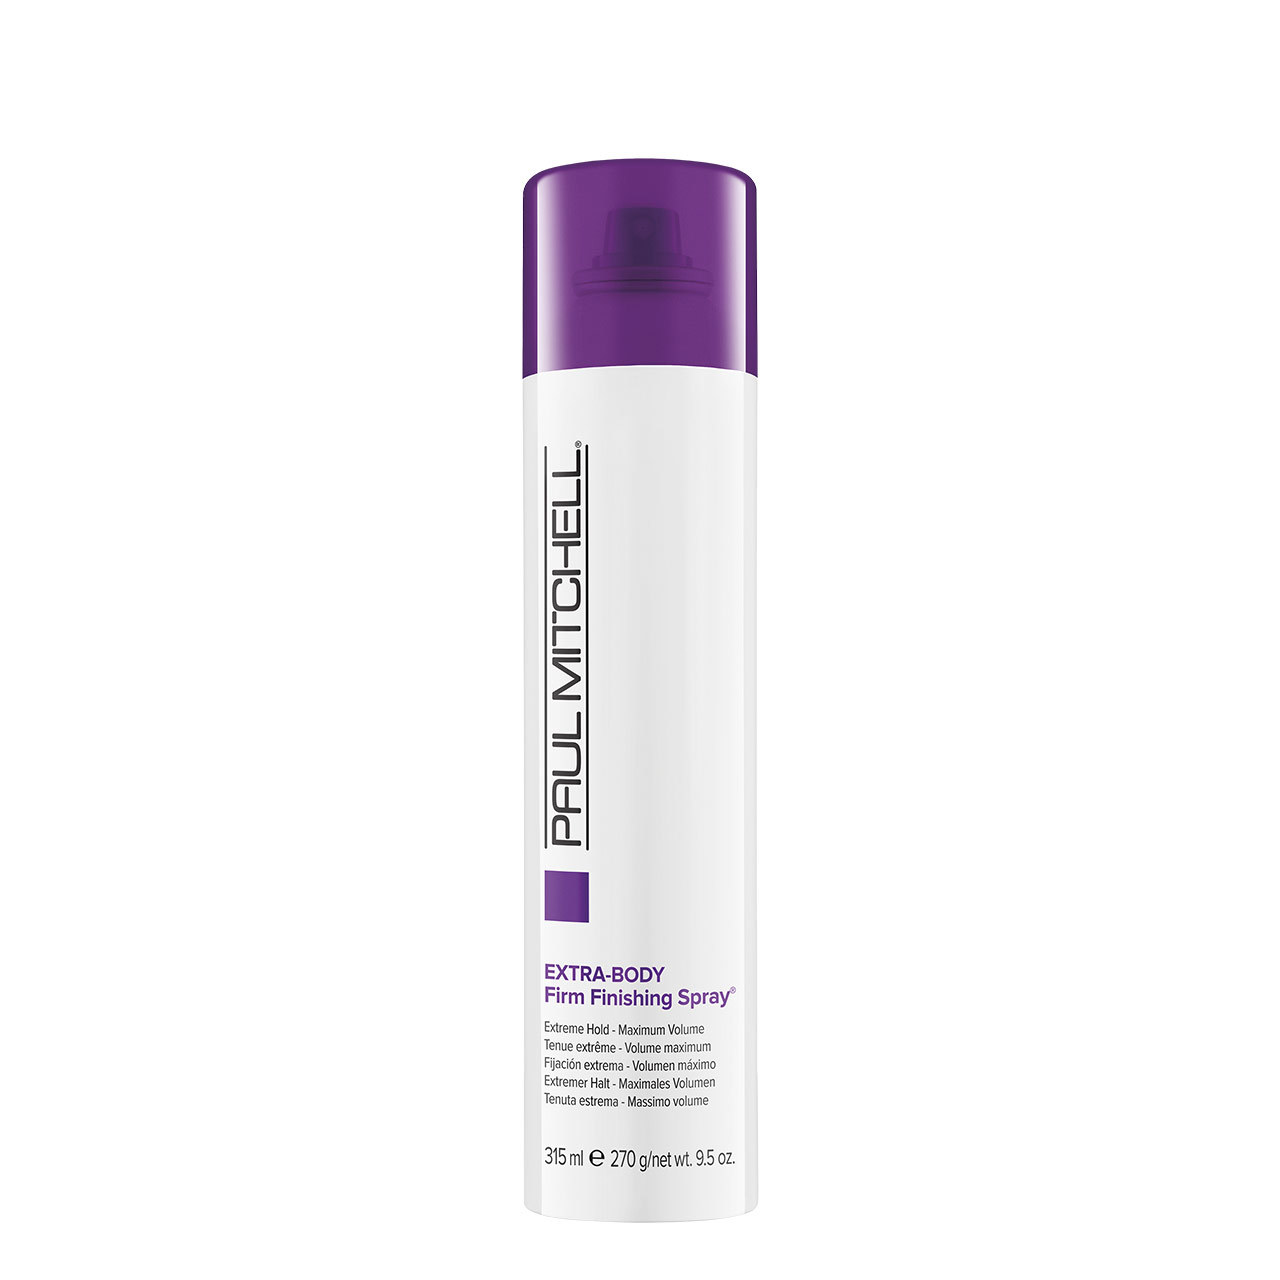 Paul Mitchell Extra Body Firm Finishing